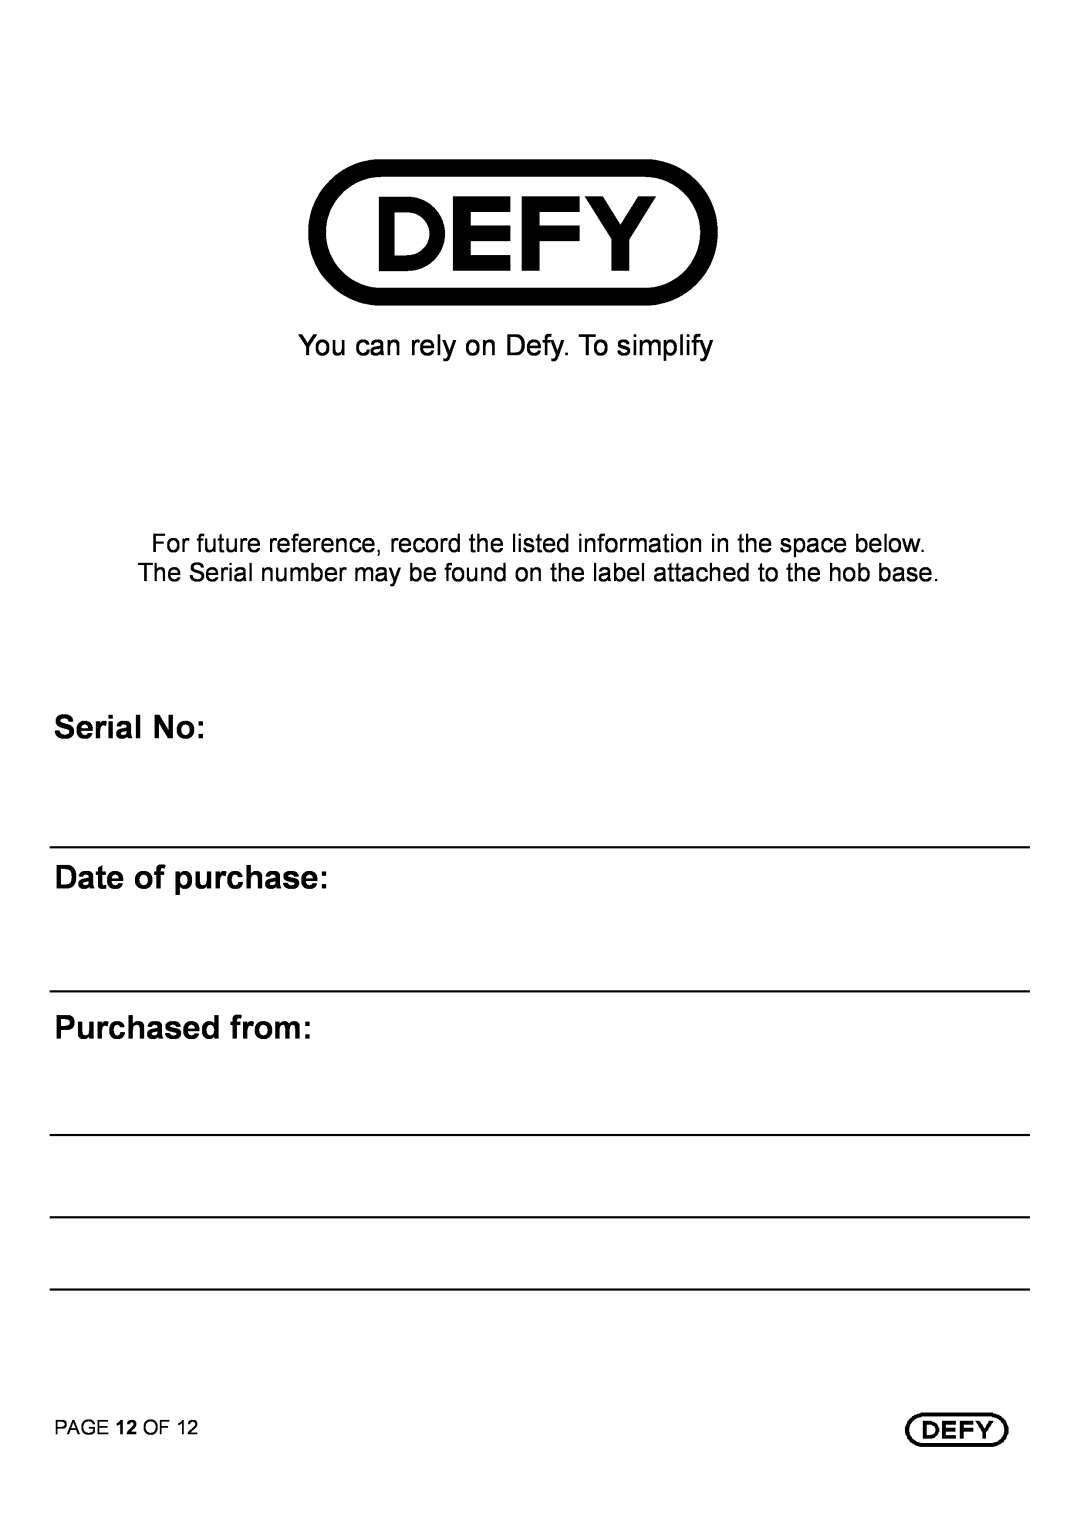 Defy Appliances DHD 395 owner manual Serial No Date of purchase Purchased from, You can rely on Defy. To simplify 